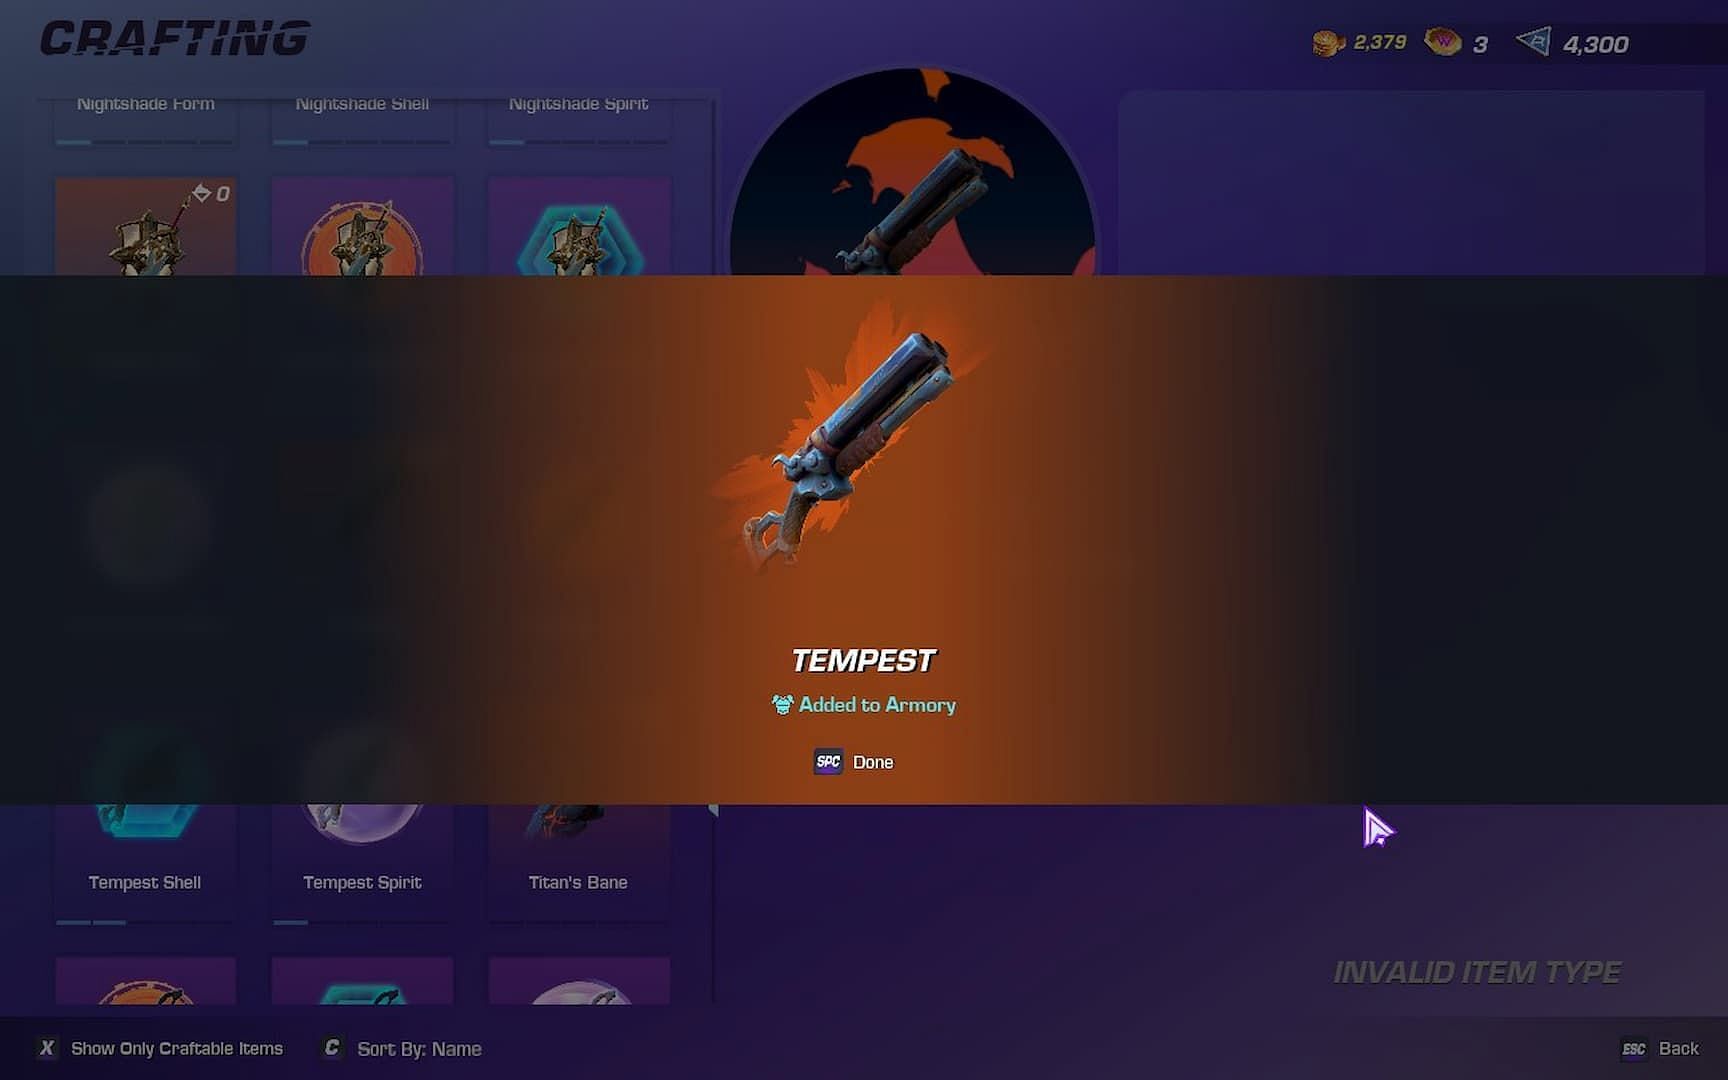 Wayfinder in-game user interface showing that the user has claimed the Tempest weapon by crafting it